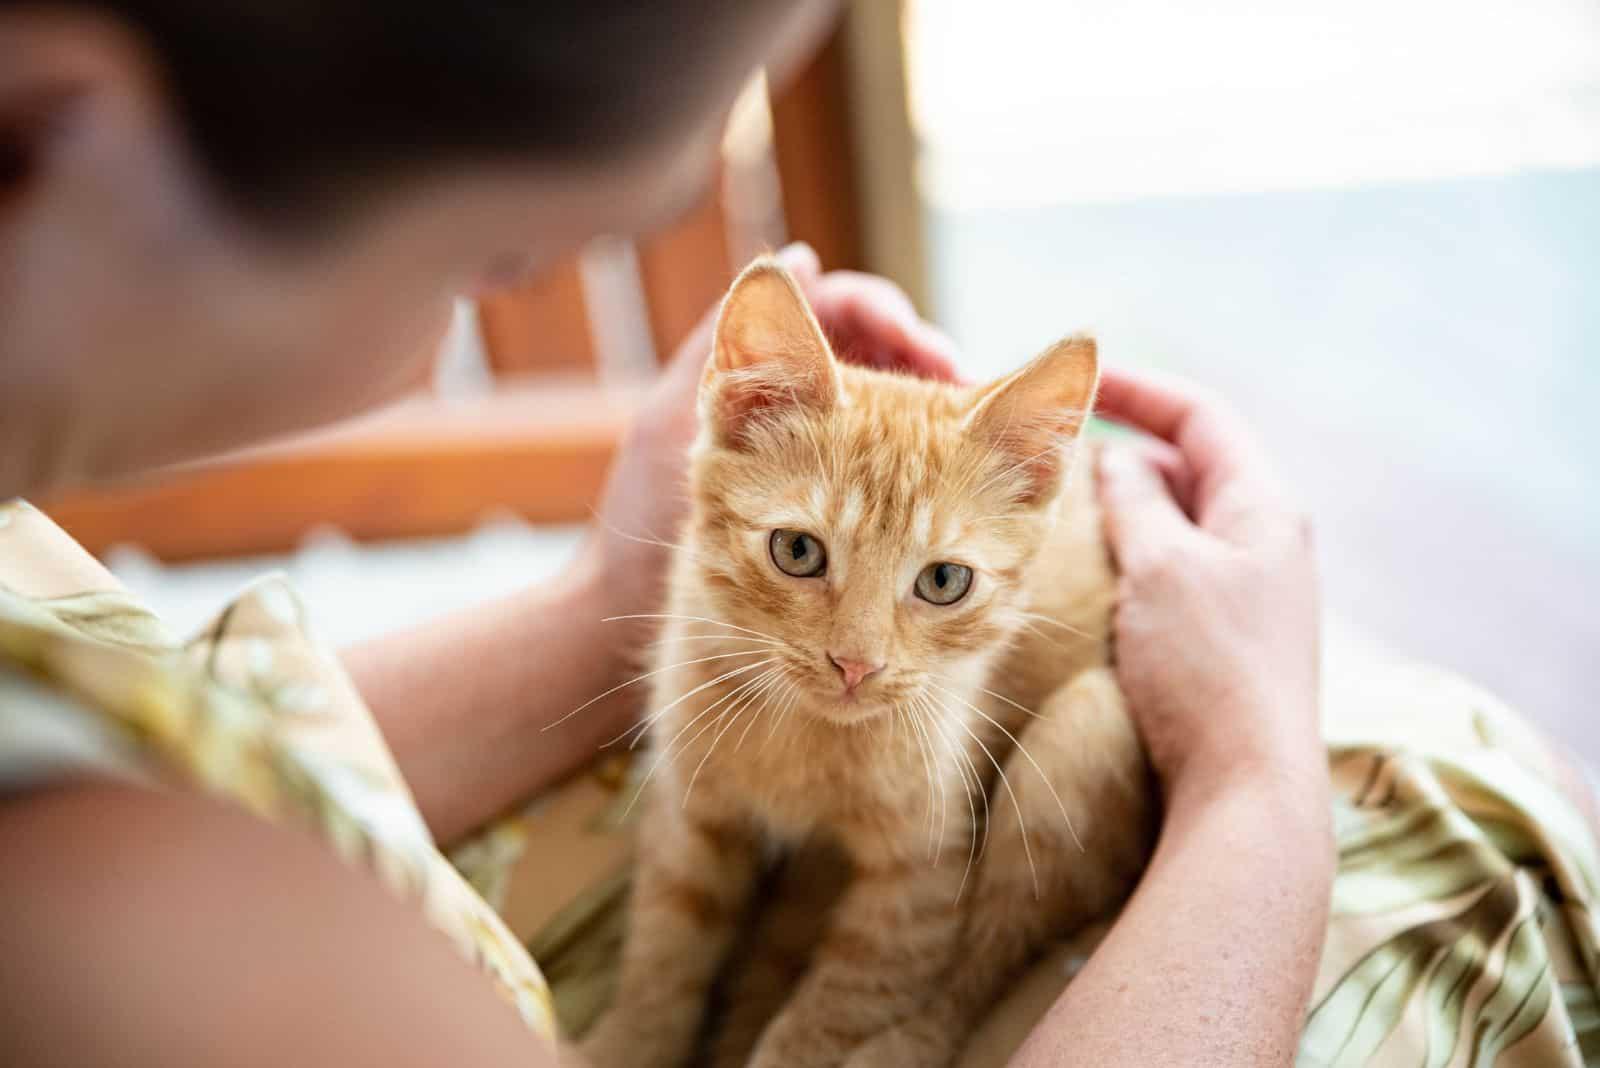 A small ginger and tabby cat on a young woman